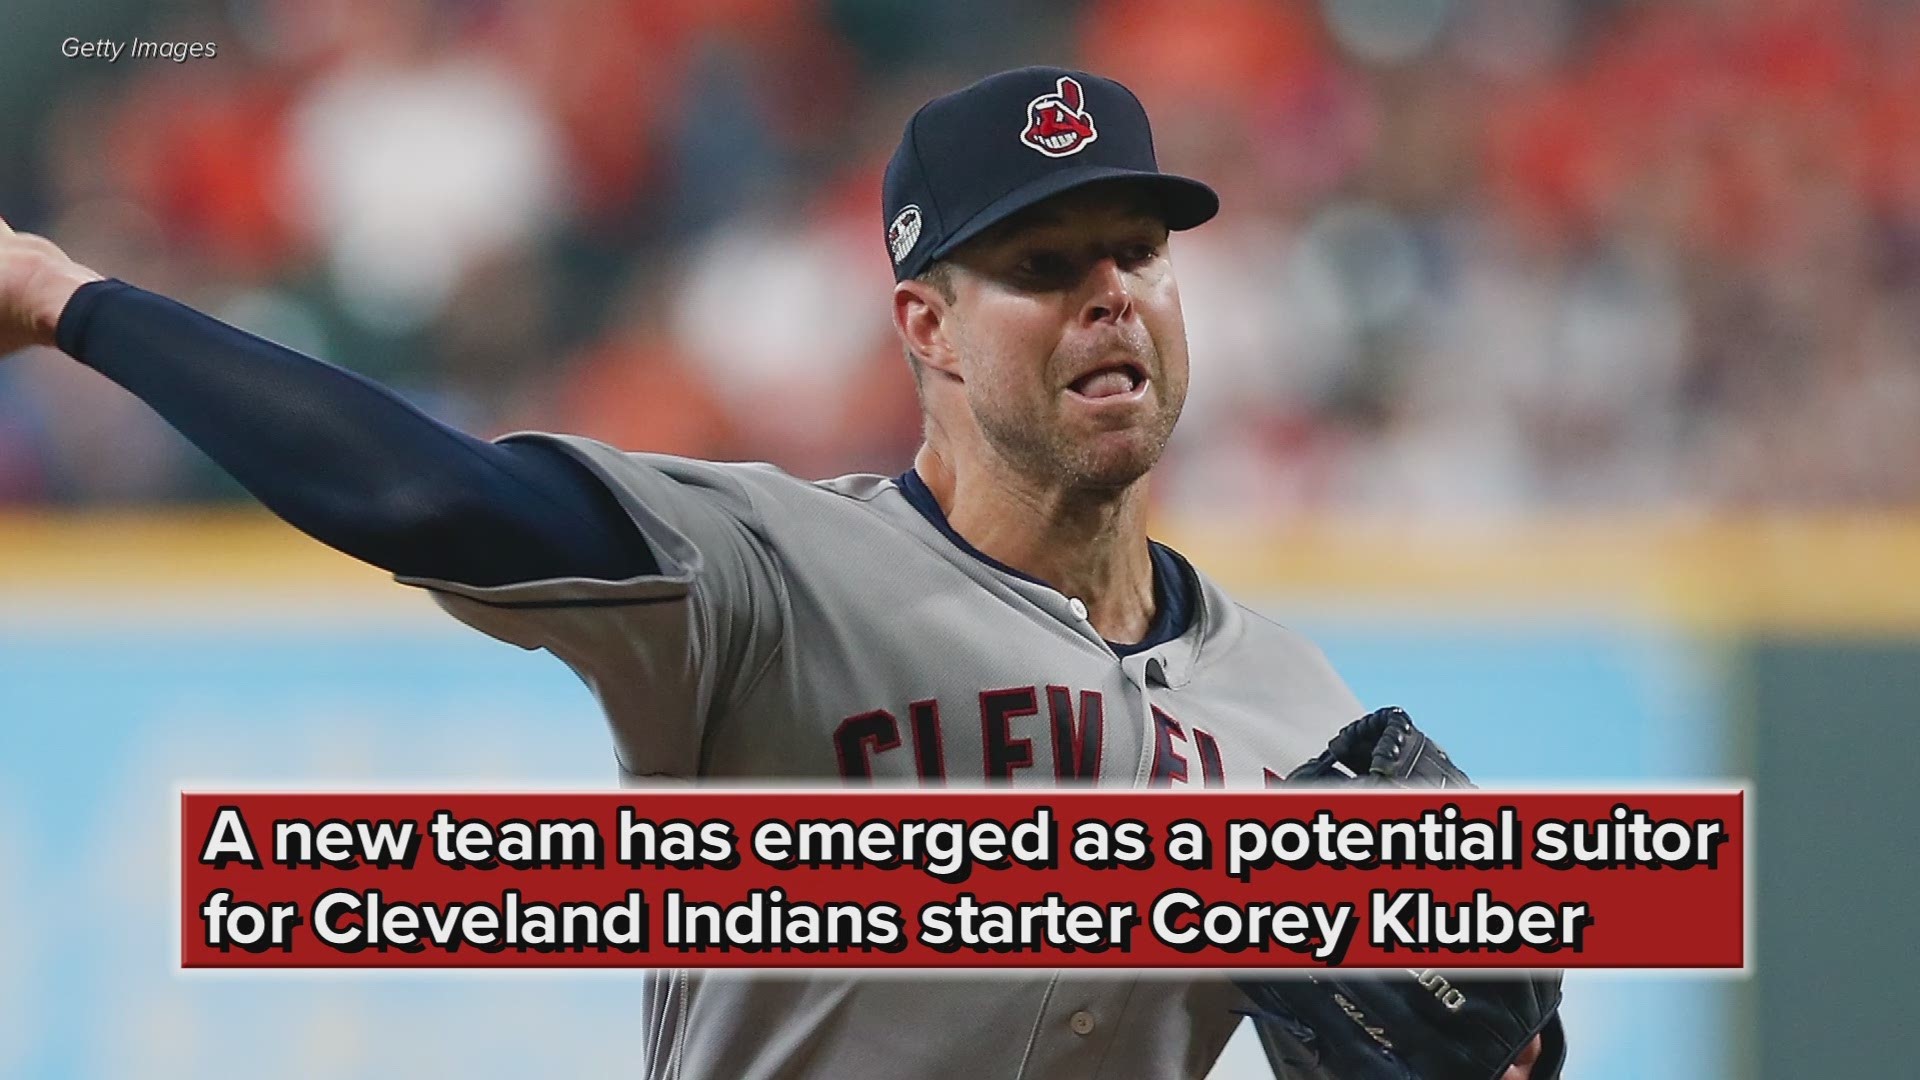 According to Jon Morosi of the MLB Network, the San Diego Padres are the latest team to emerge as a potential suitor for Cleveland Indians starter Corey Kluber.